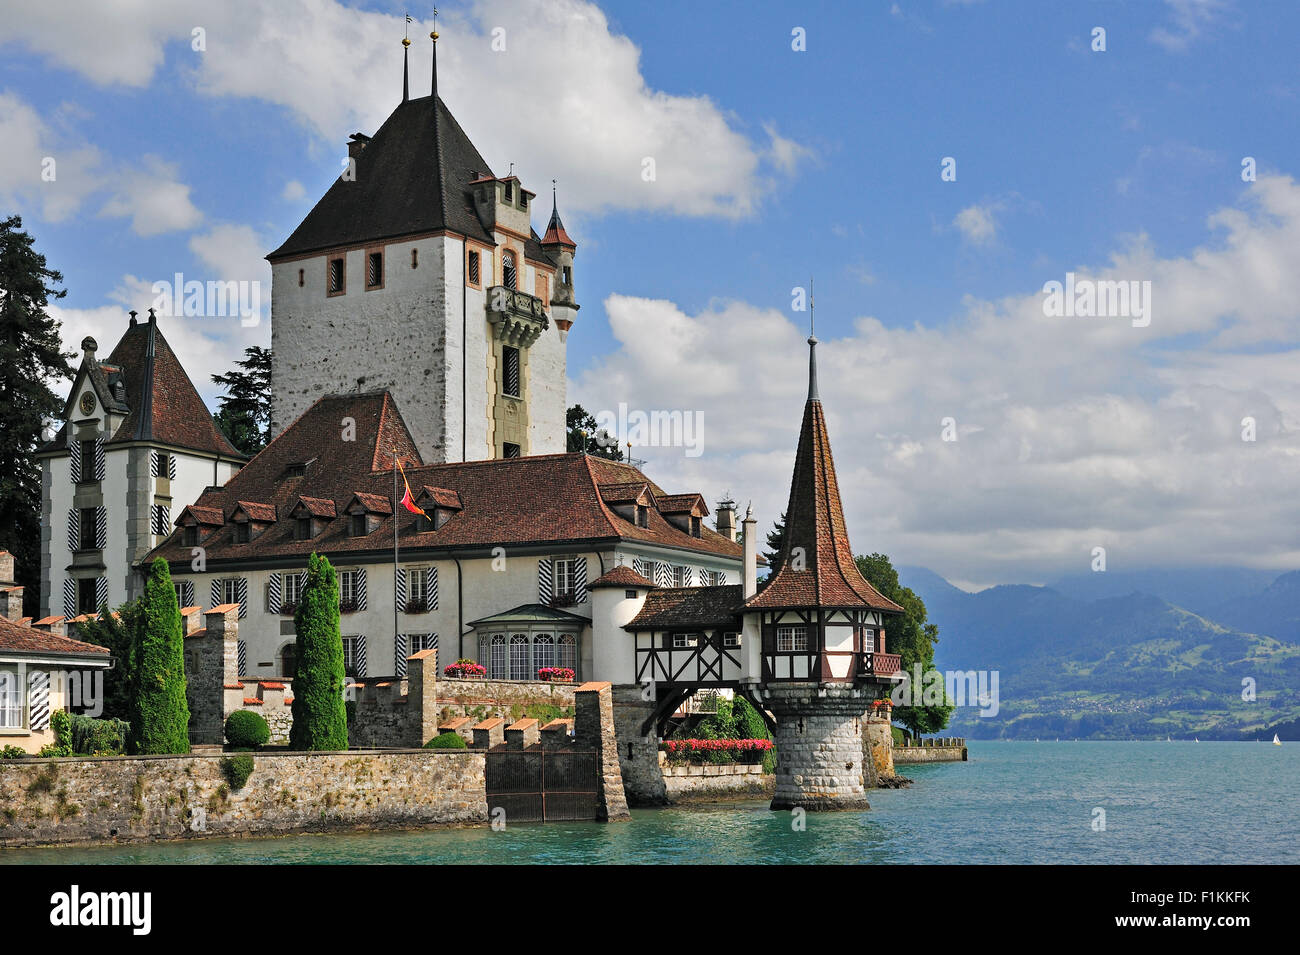 The water castle Schloss Oberhofen along the Tunersee / Lake Thun in the Bernese Alps, Switzerland Stock Photo